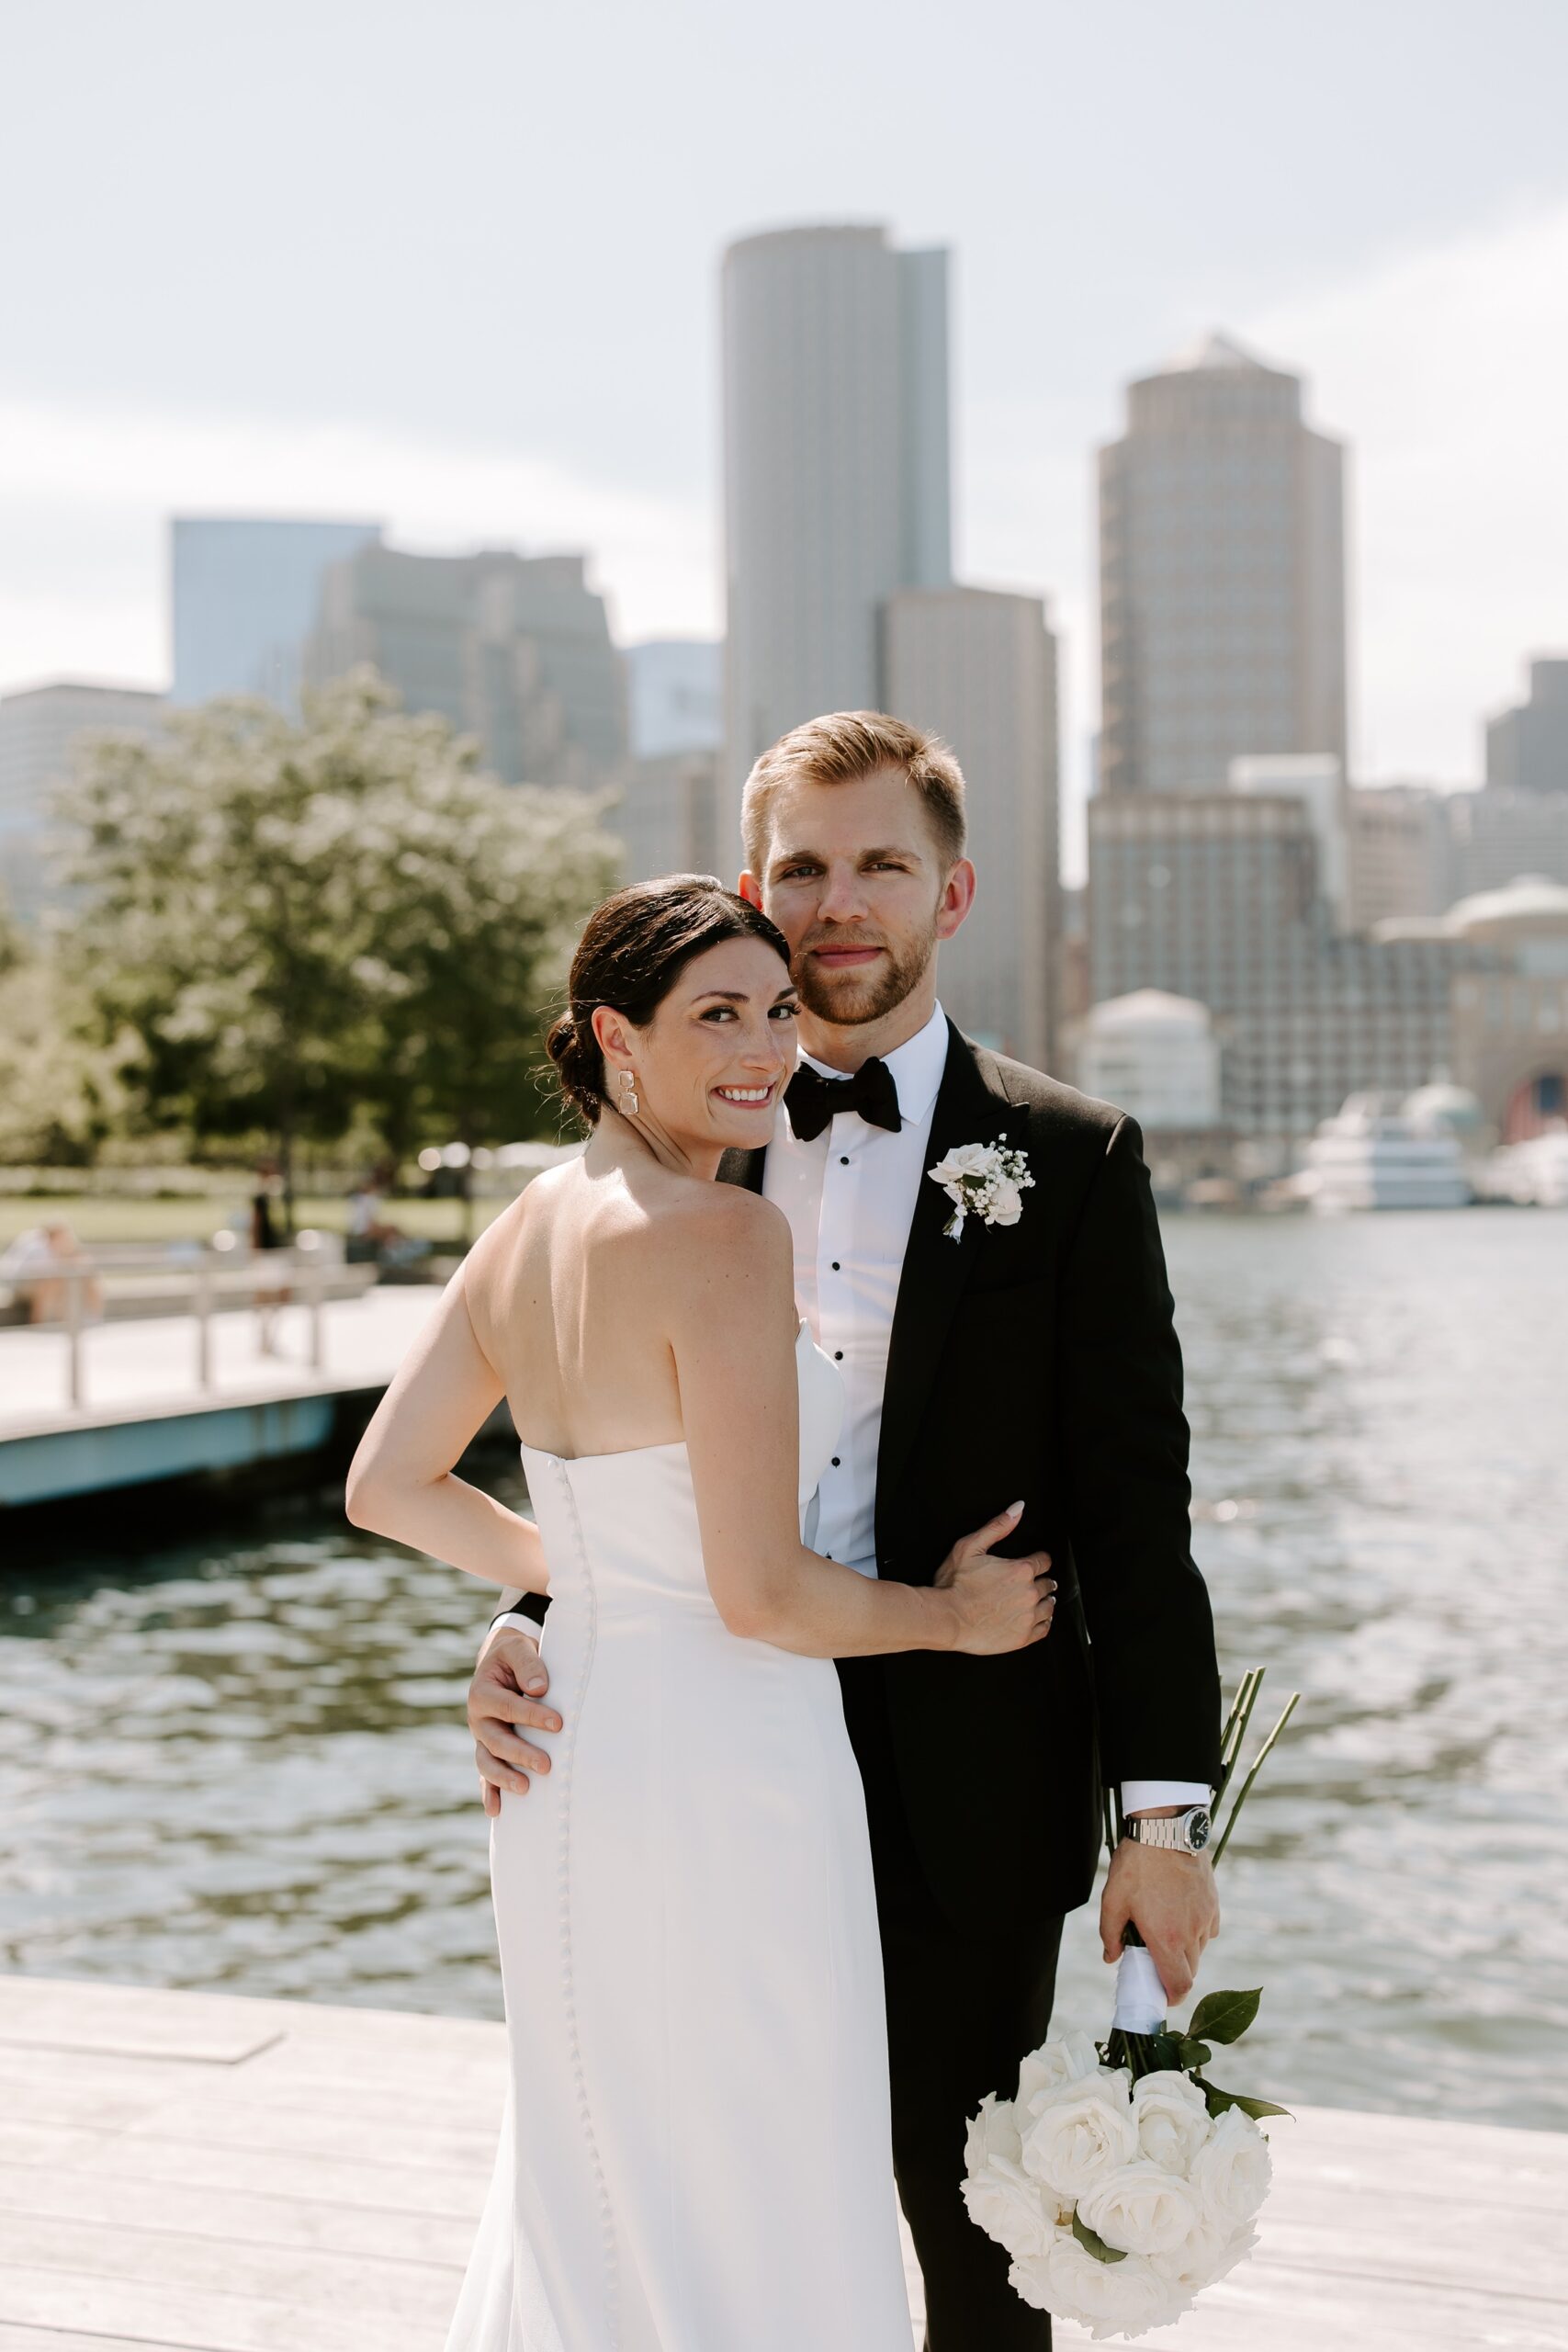 Bride and groom portraits at Boston Seaport